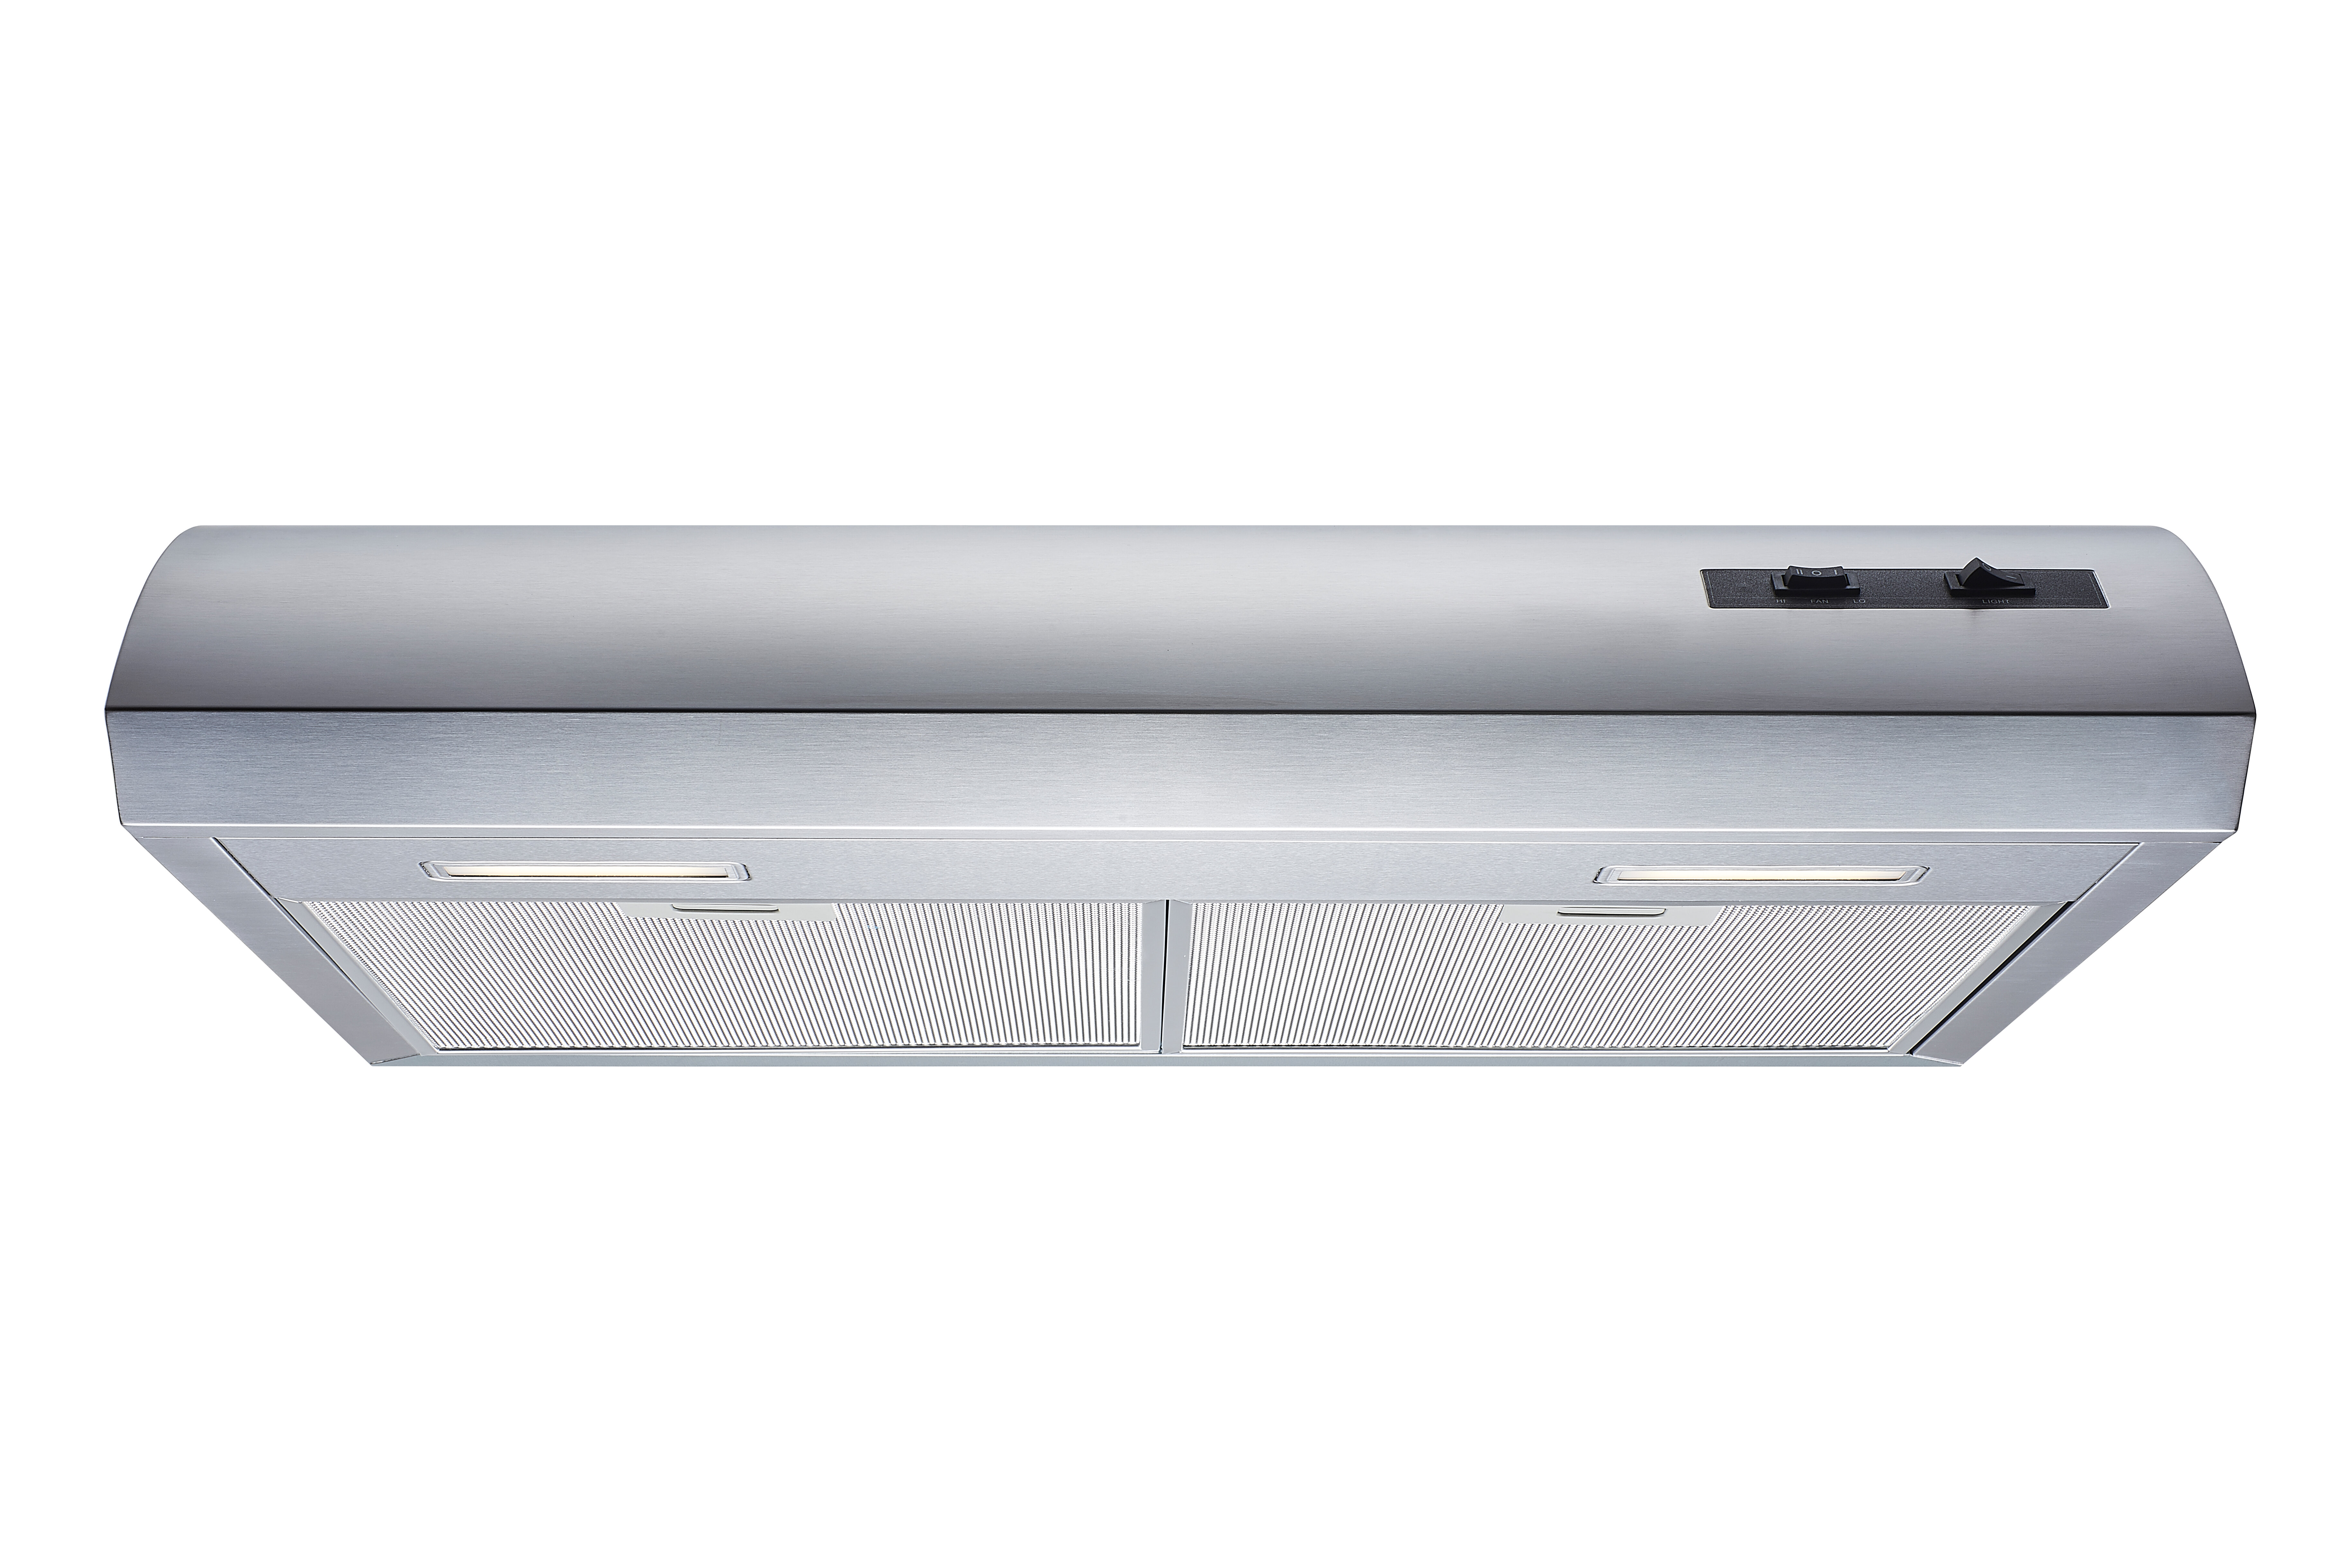 Ciarra 30 200 CFM Under Cabinet Convertible Range Hood in Stainless Steel with LED Lights - Silver